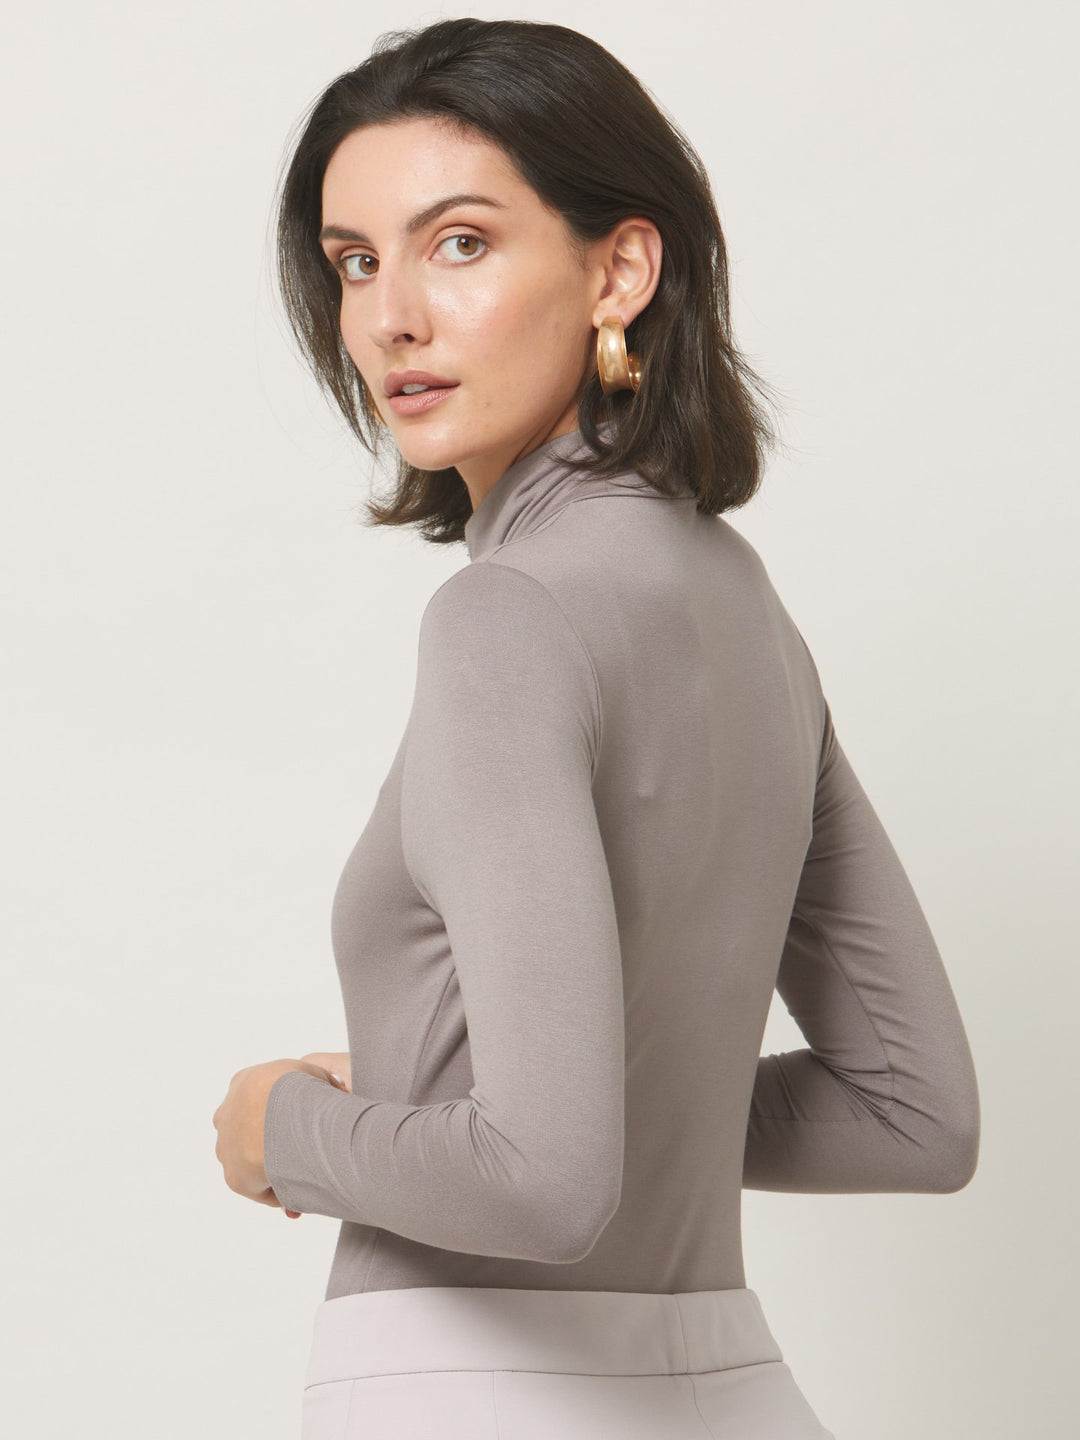 A signature hmca piece. our perennial best-seller. This versatile top features a flattering mesh yoke and sleeves on a snug jersey body. Perfect underpinning to suiting or a more casual pant.